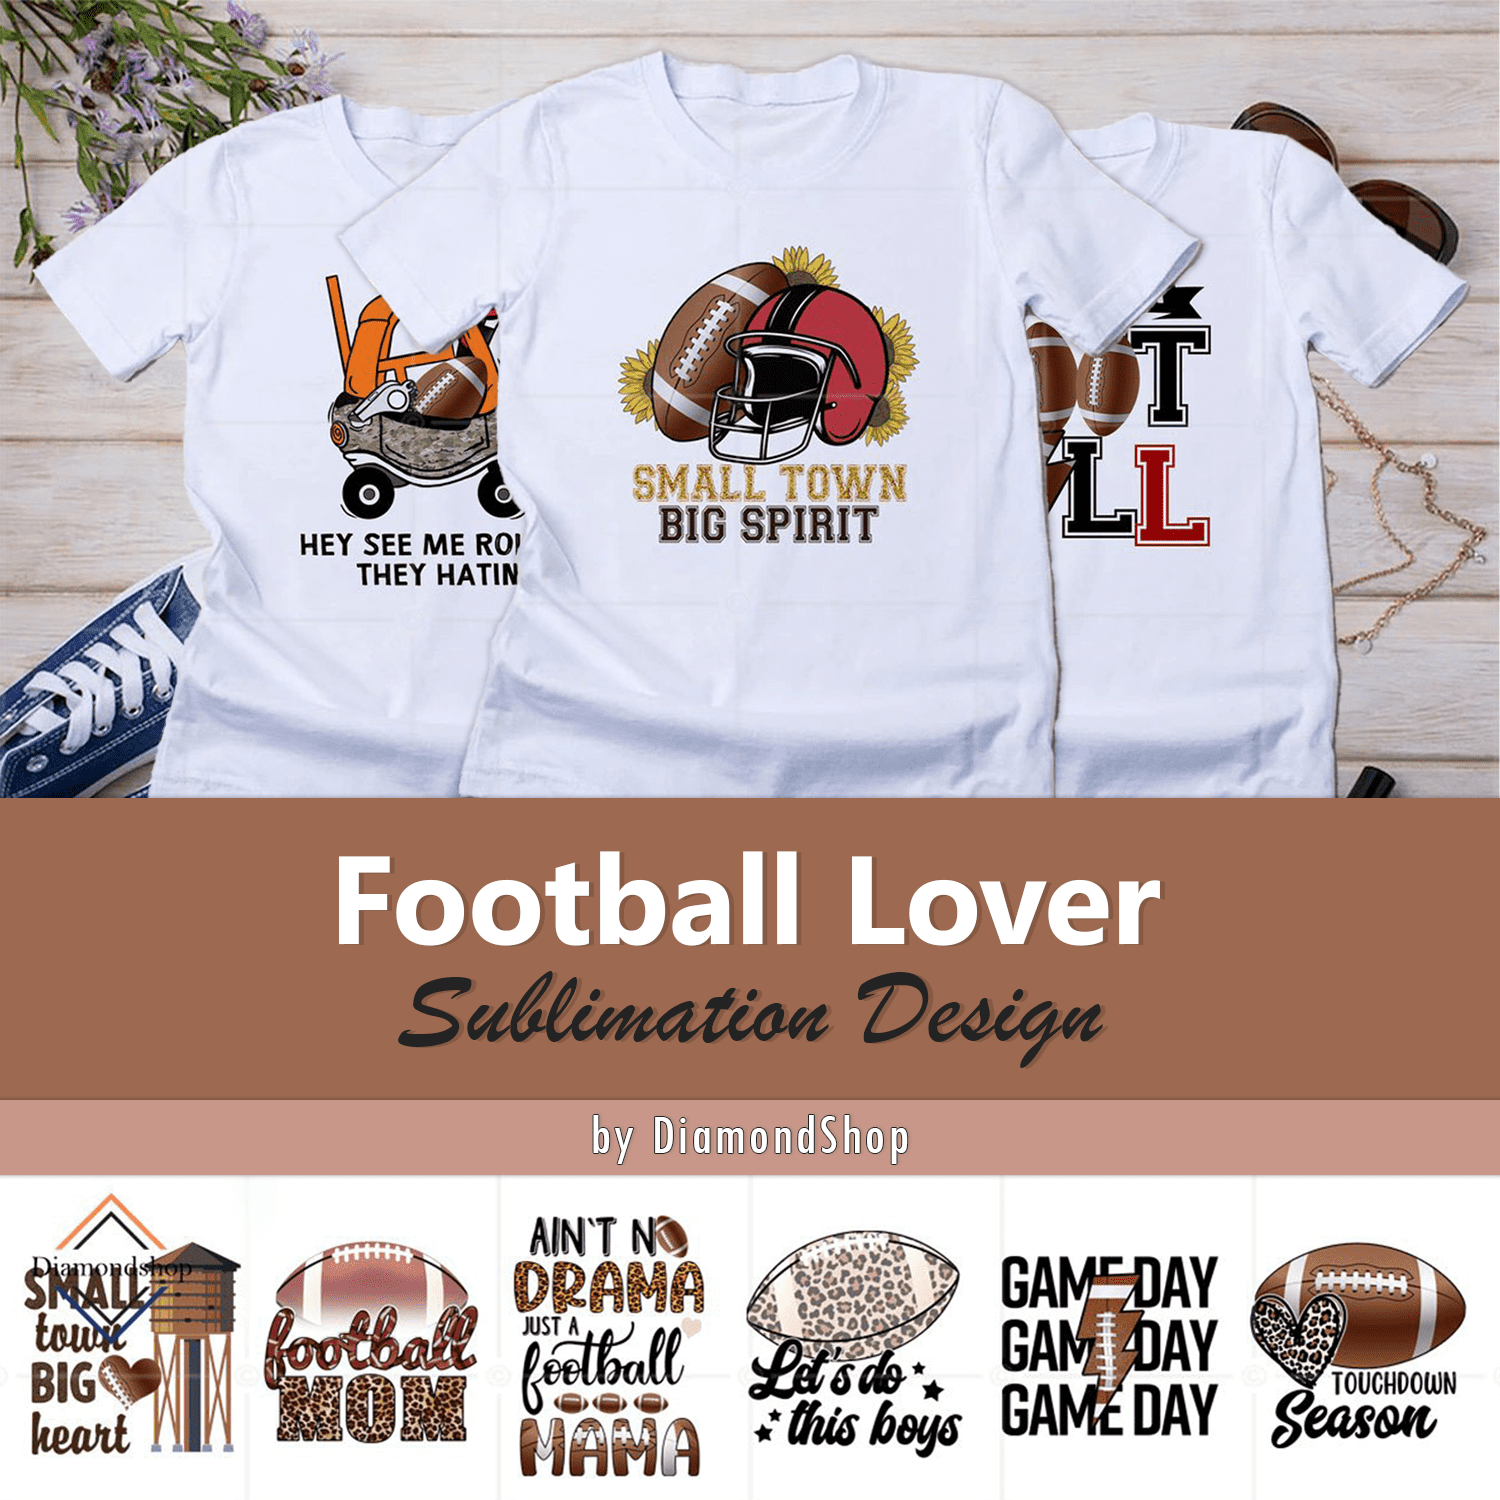 Football Lover Sublimation Design cover.